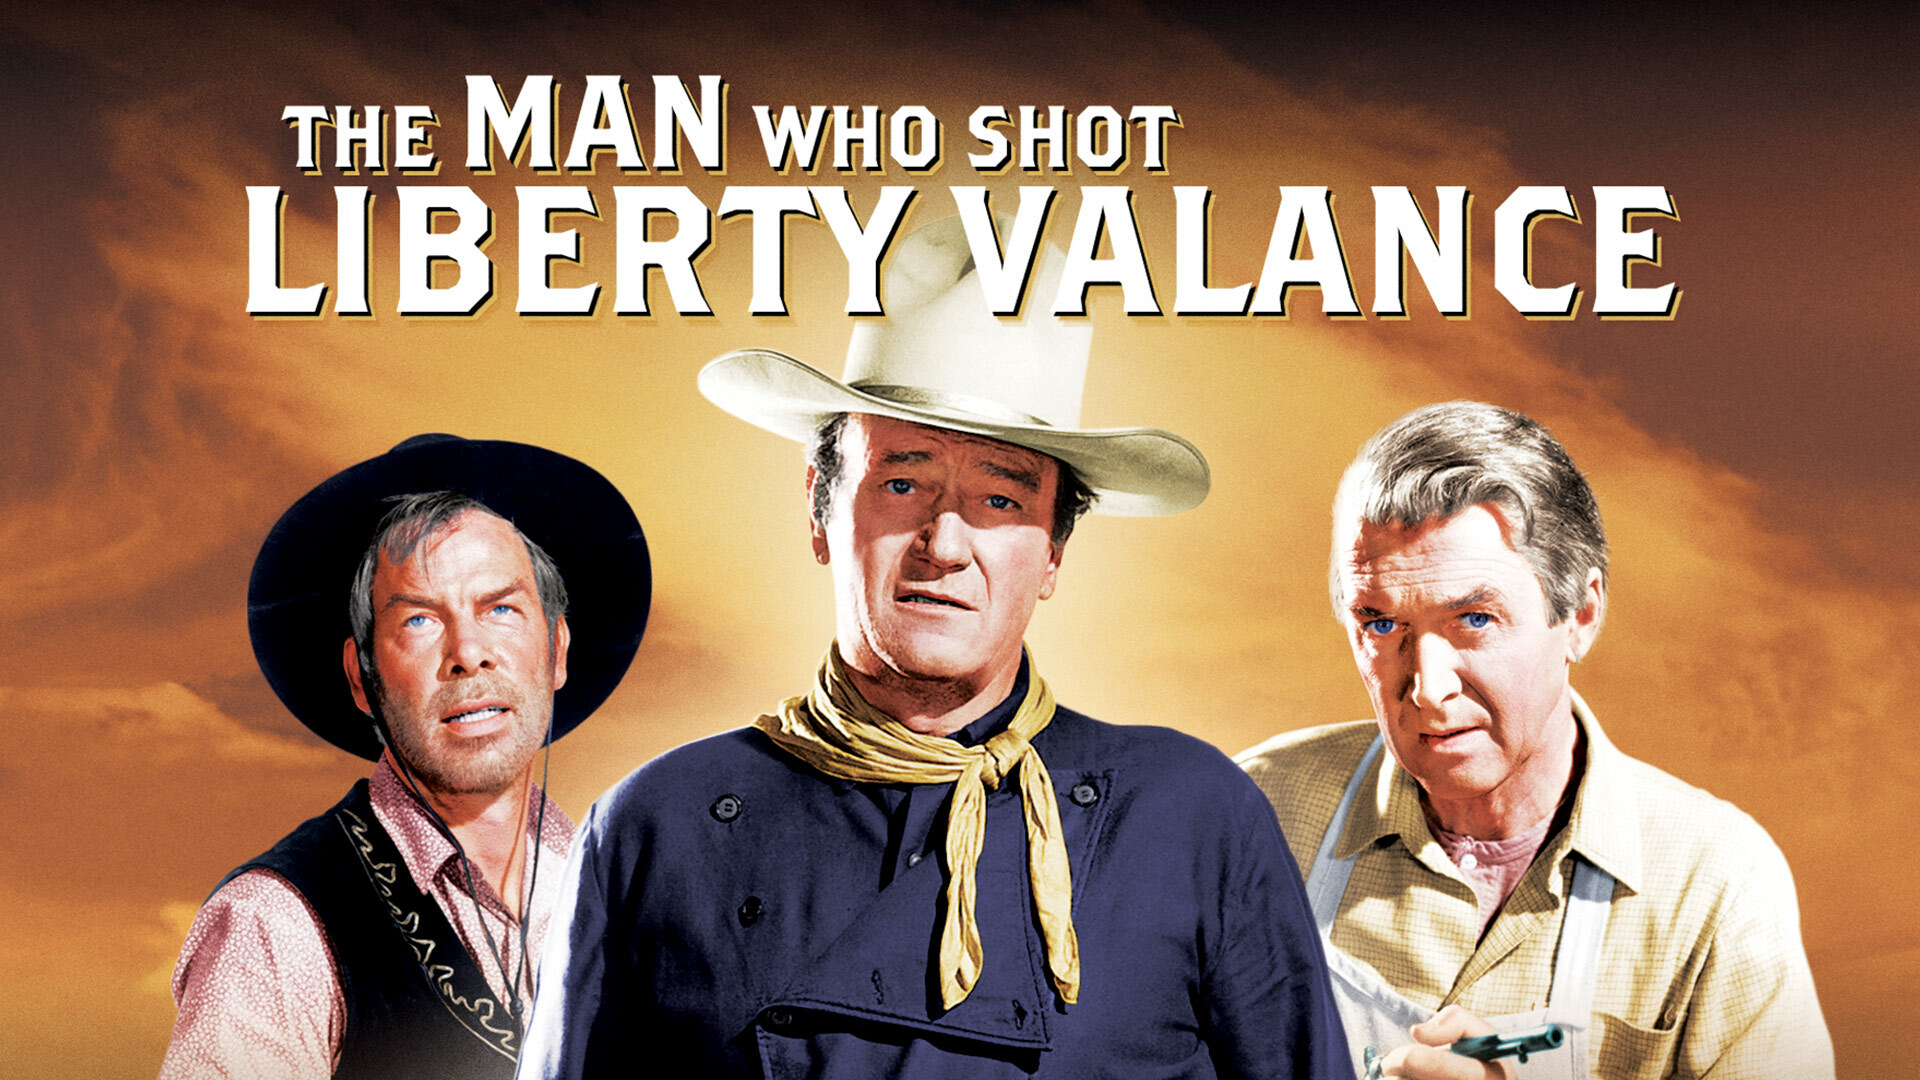 33-facts-about-the-movie-the-man-who-shot-liberty-valance